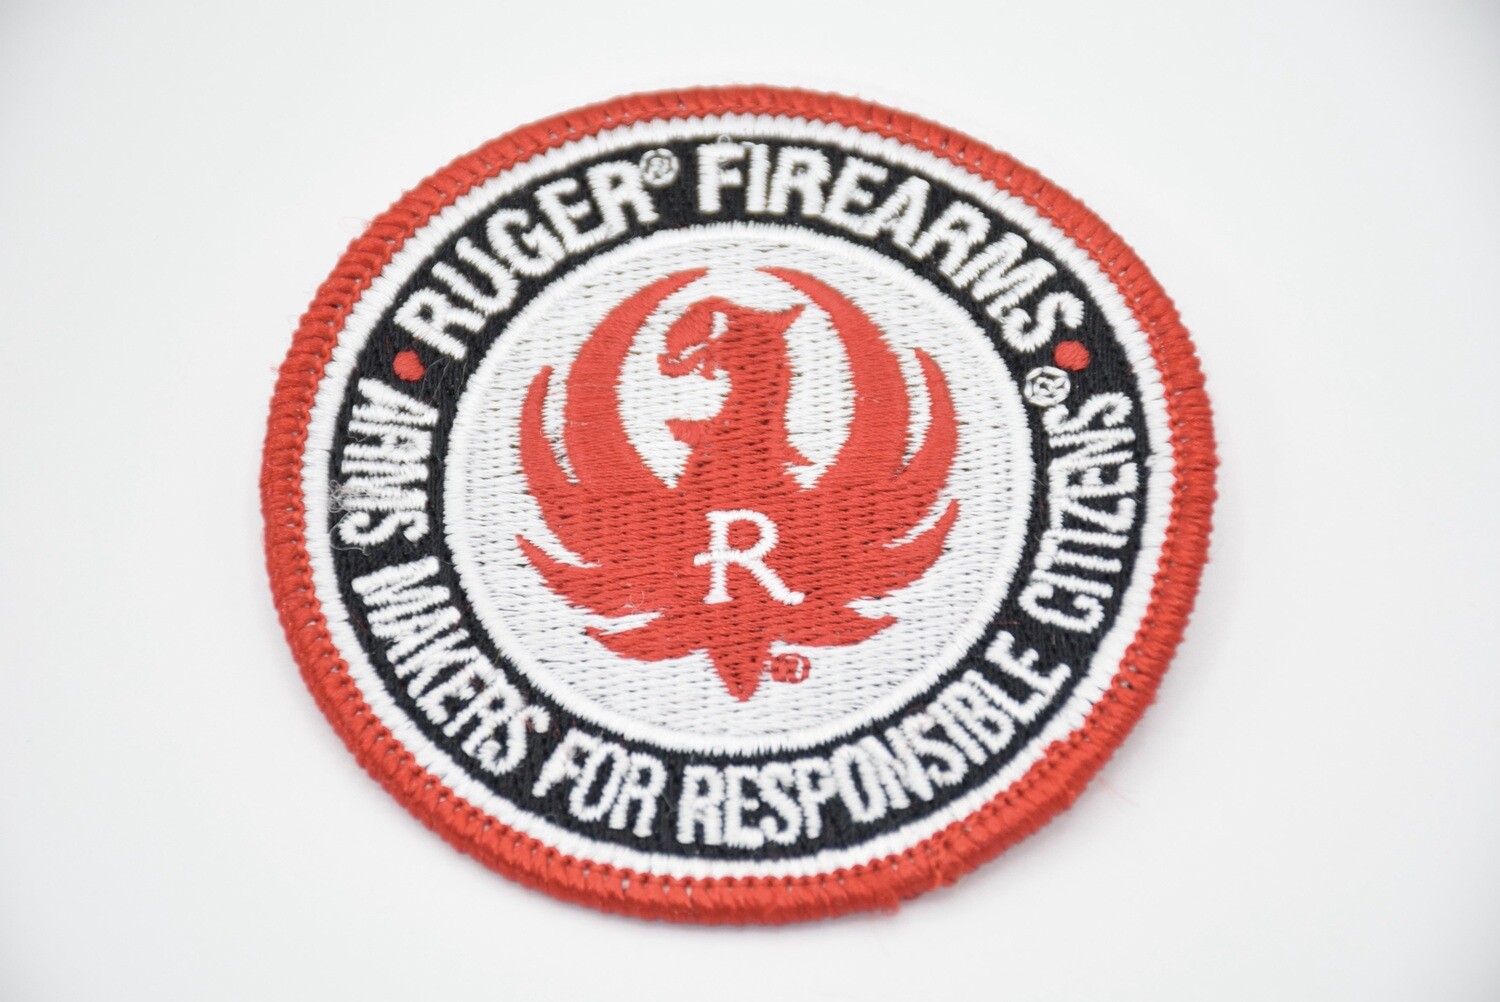 RUGER LOGO PATCH ARMS MAKER FOR RESPONSIBLE CITIZENS HOOK/LOOP BACKING